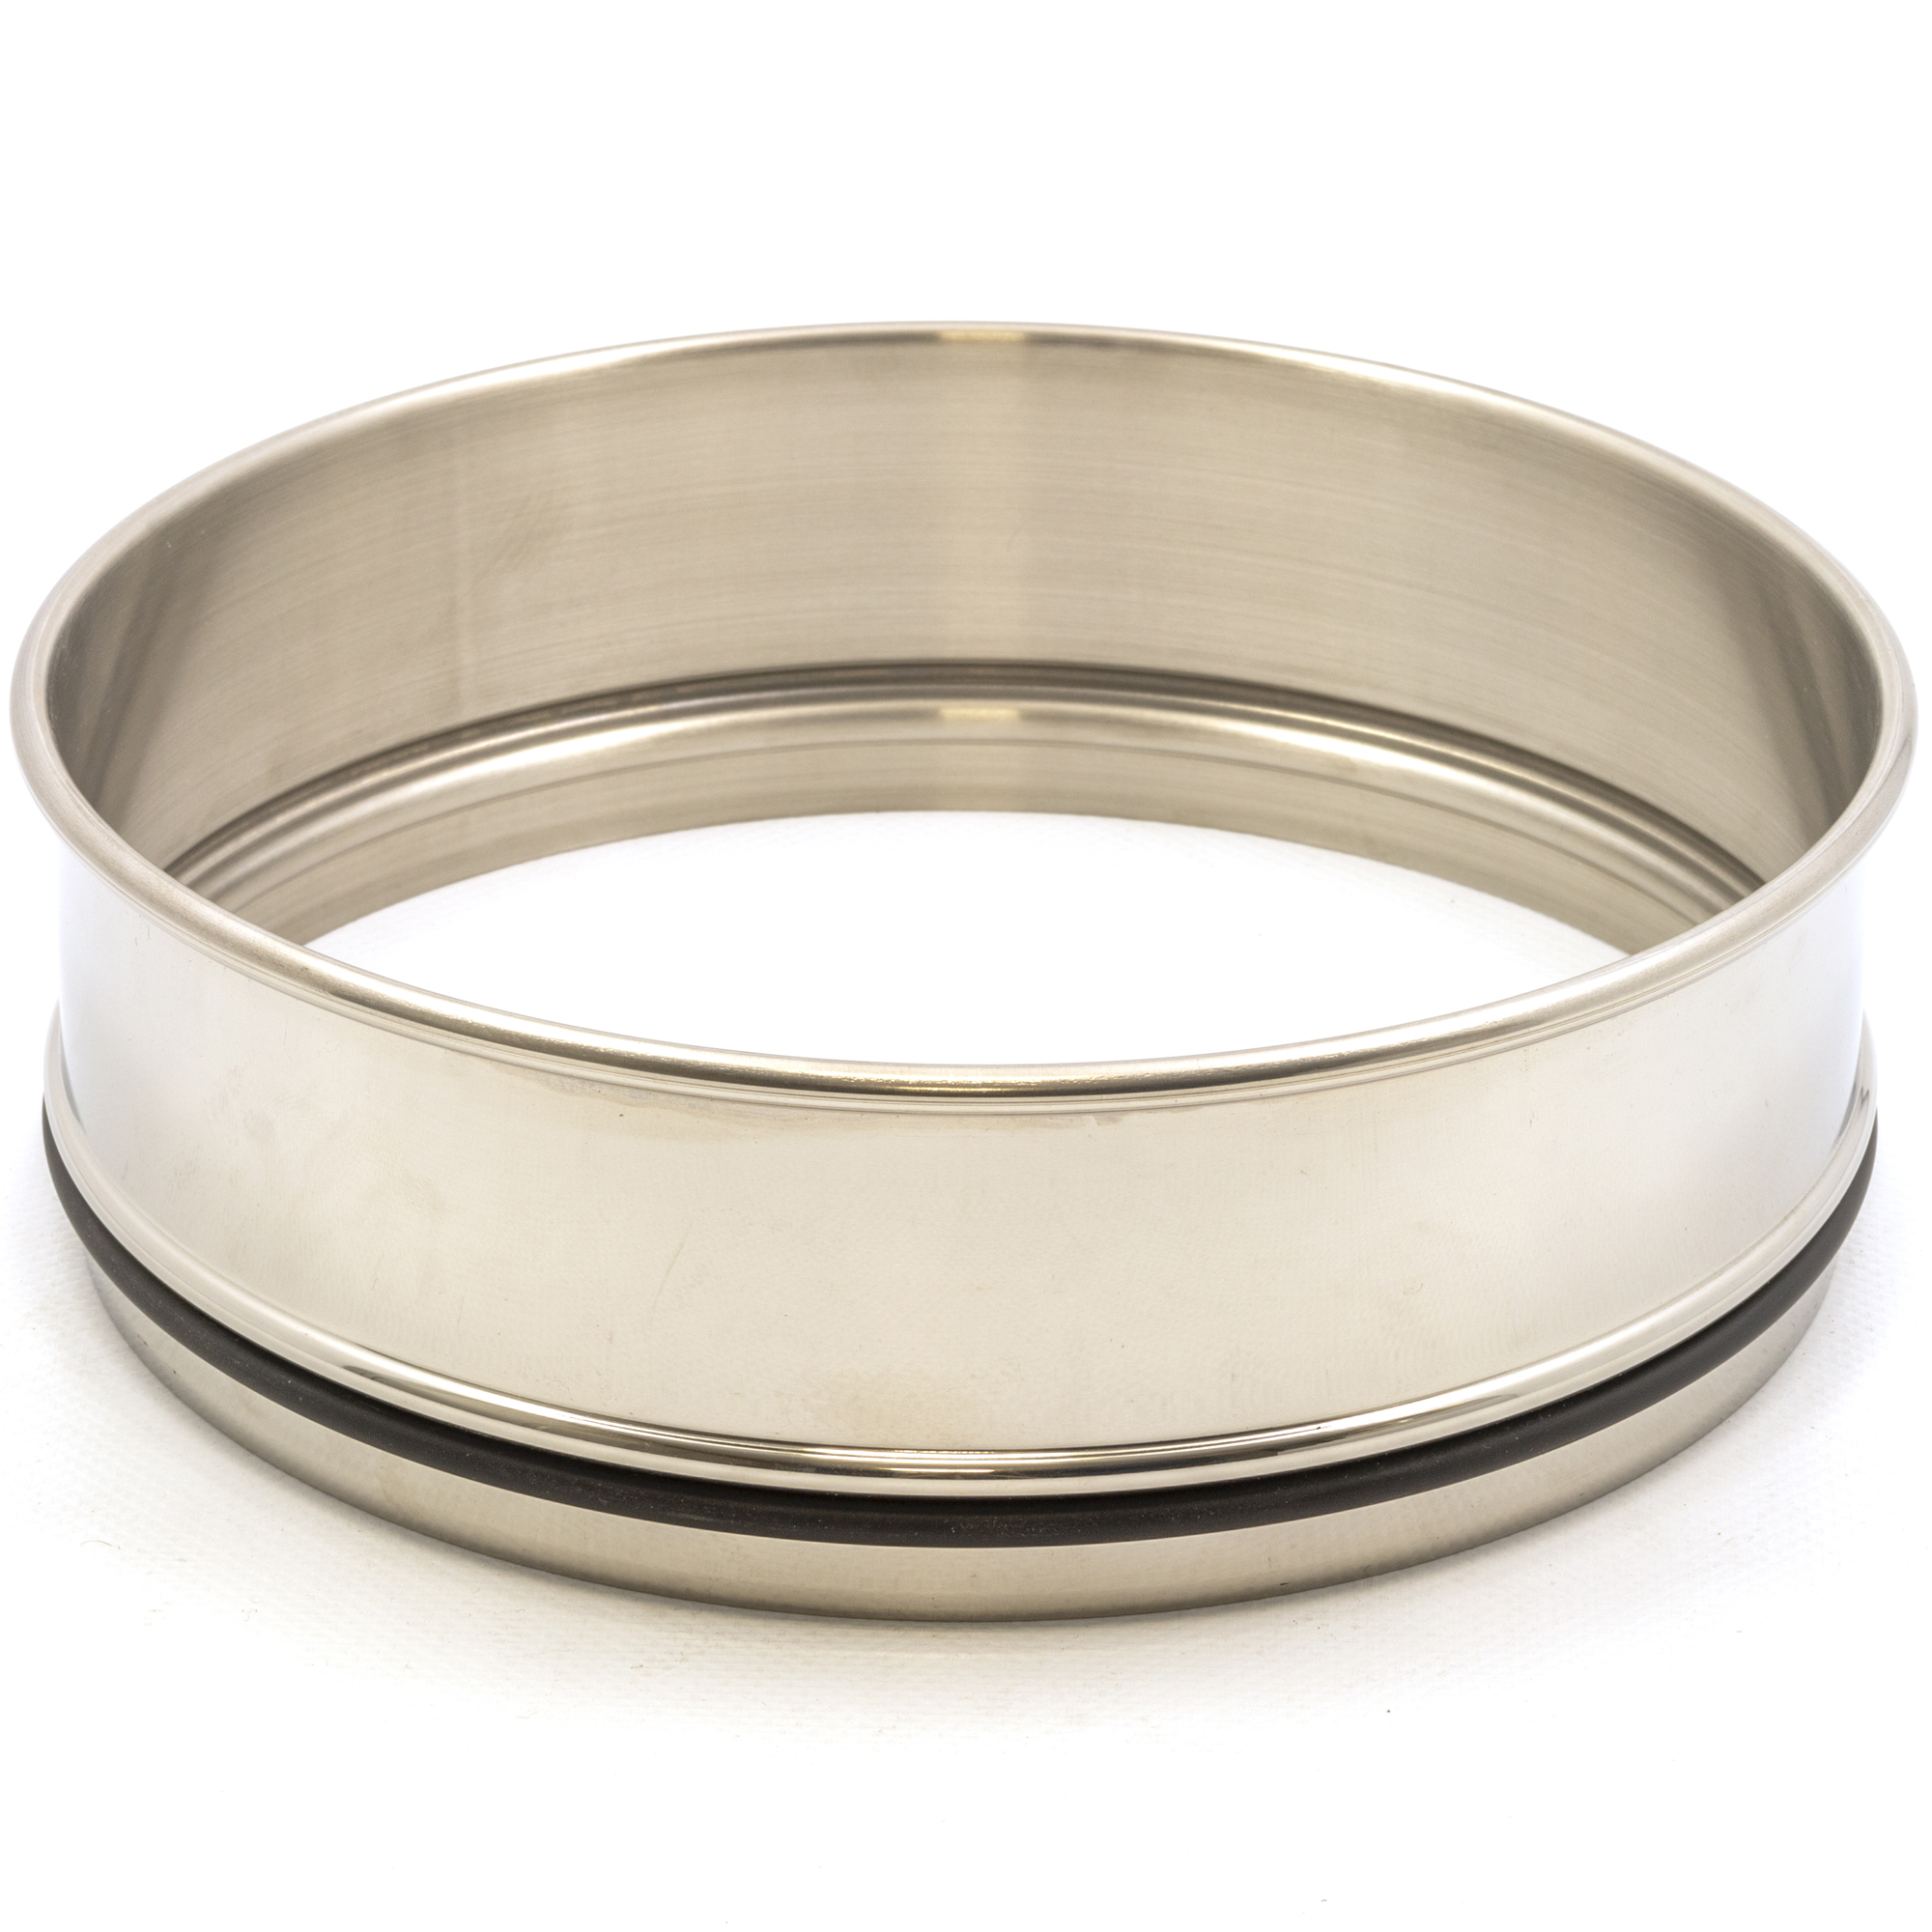 HAVE 205923906 Intermediate ring for 250x55mm sieves